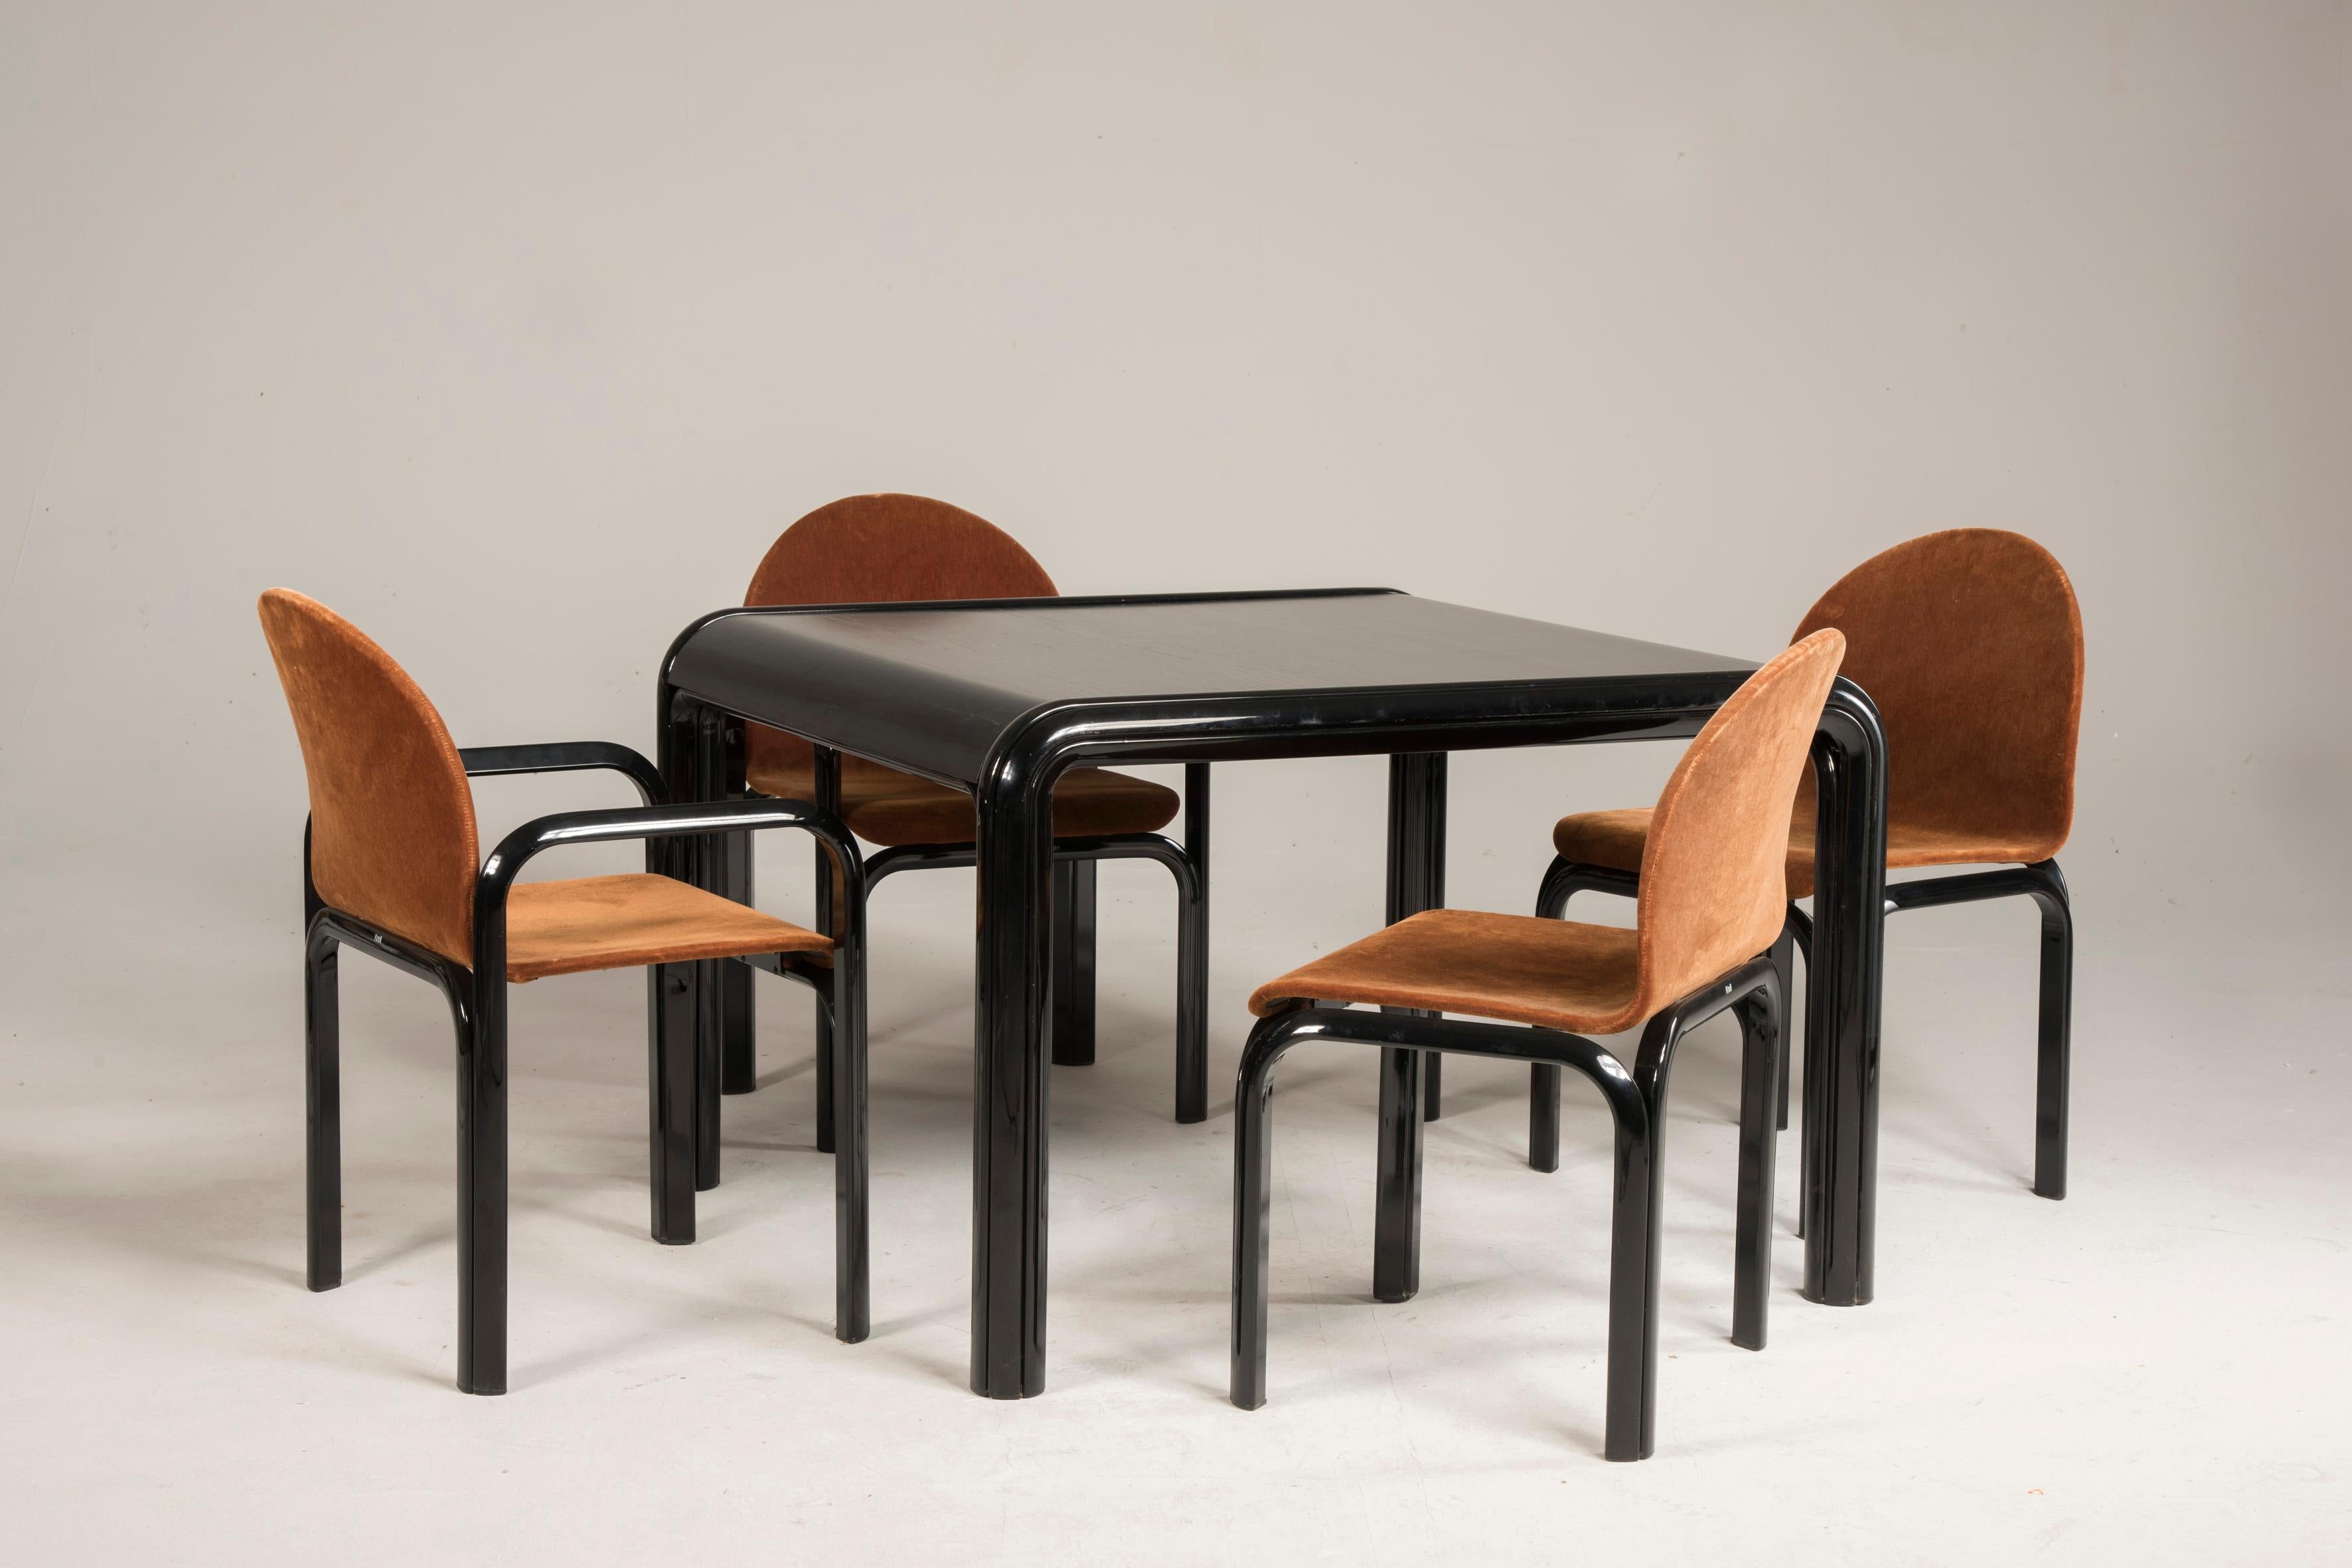 Knoll black wood table and brown velvet chairs
Designed by Gae Aulenti and made by Knoll in 1970s period, this table features black rolled steel frame and black laminate top. The chairs with black extruded aluminum frames have brown velvet recent